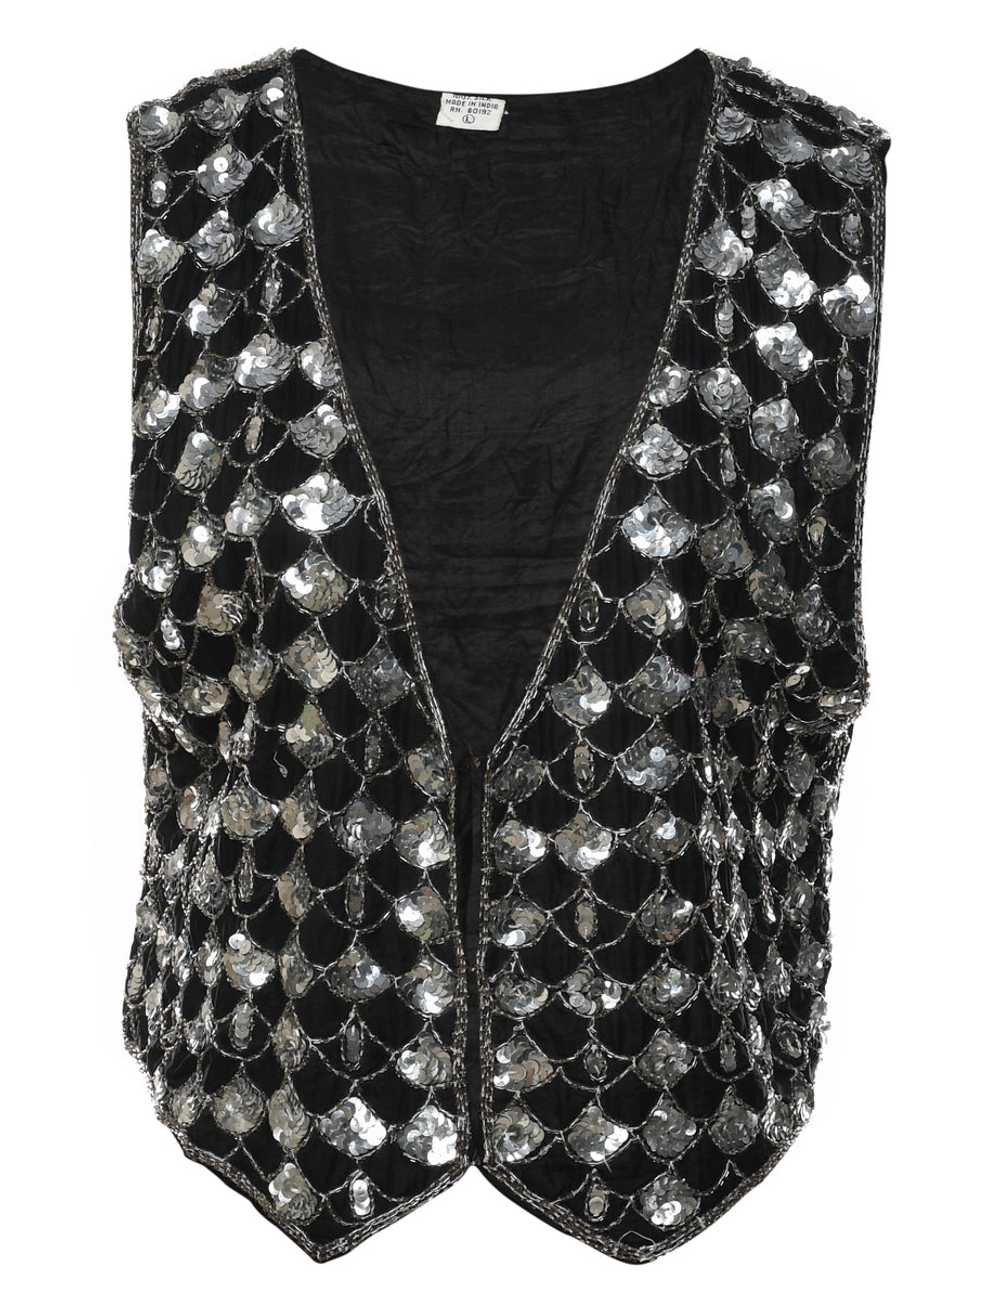 Silk Black & Silver Sequined Waistcoat - M - image 1